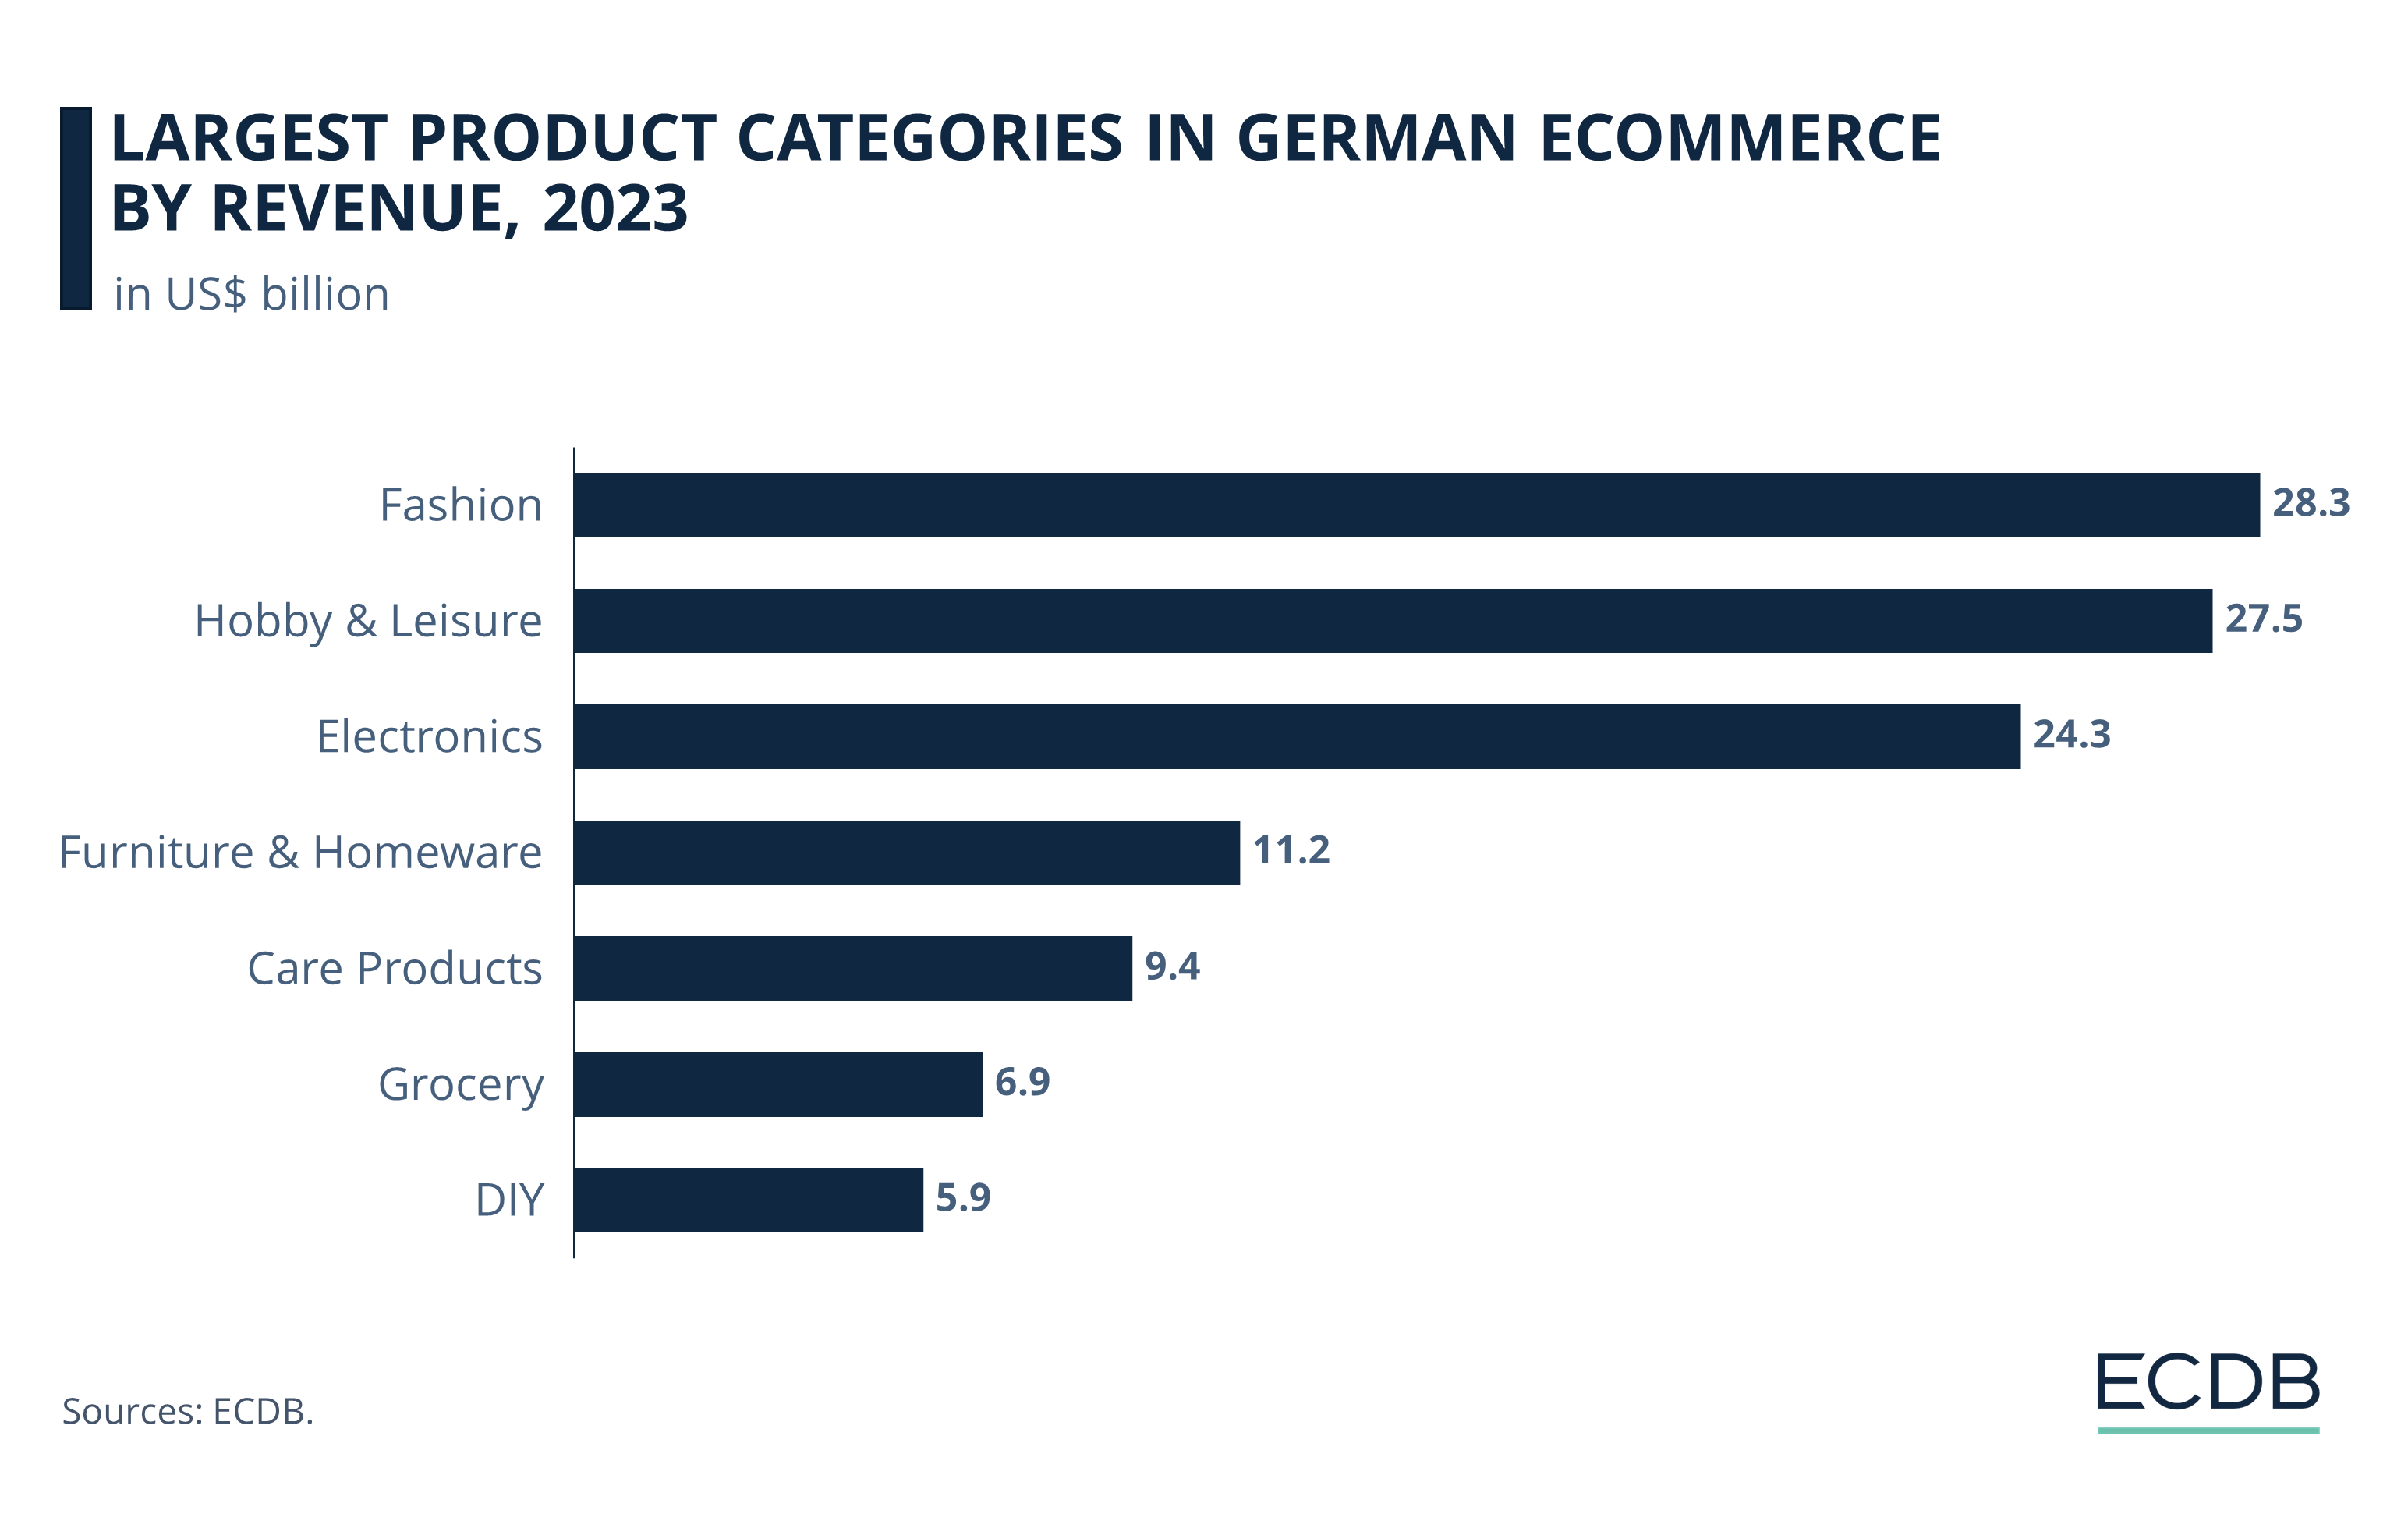 Largest Product Categories in German eCommerce by Revenue, 2023